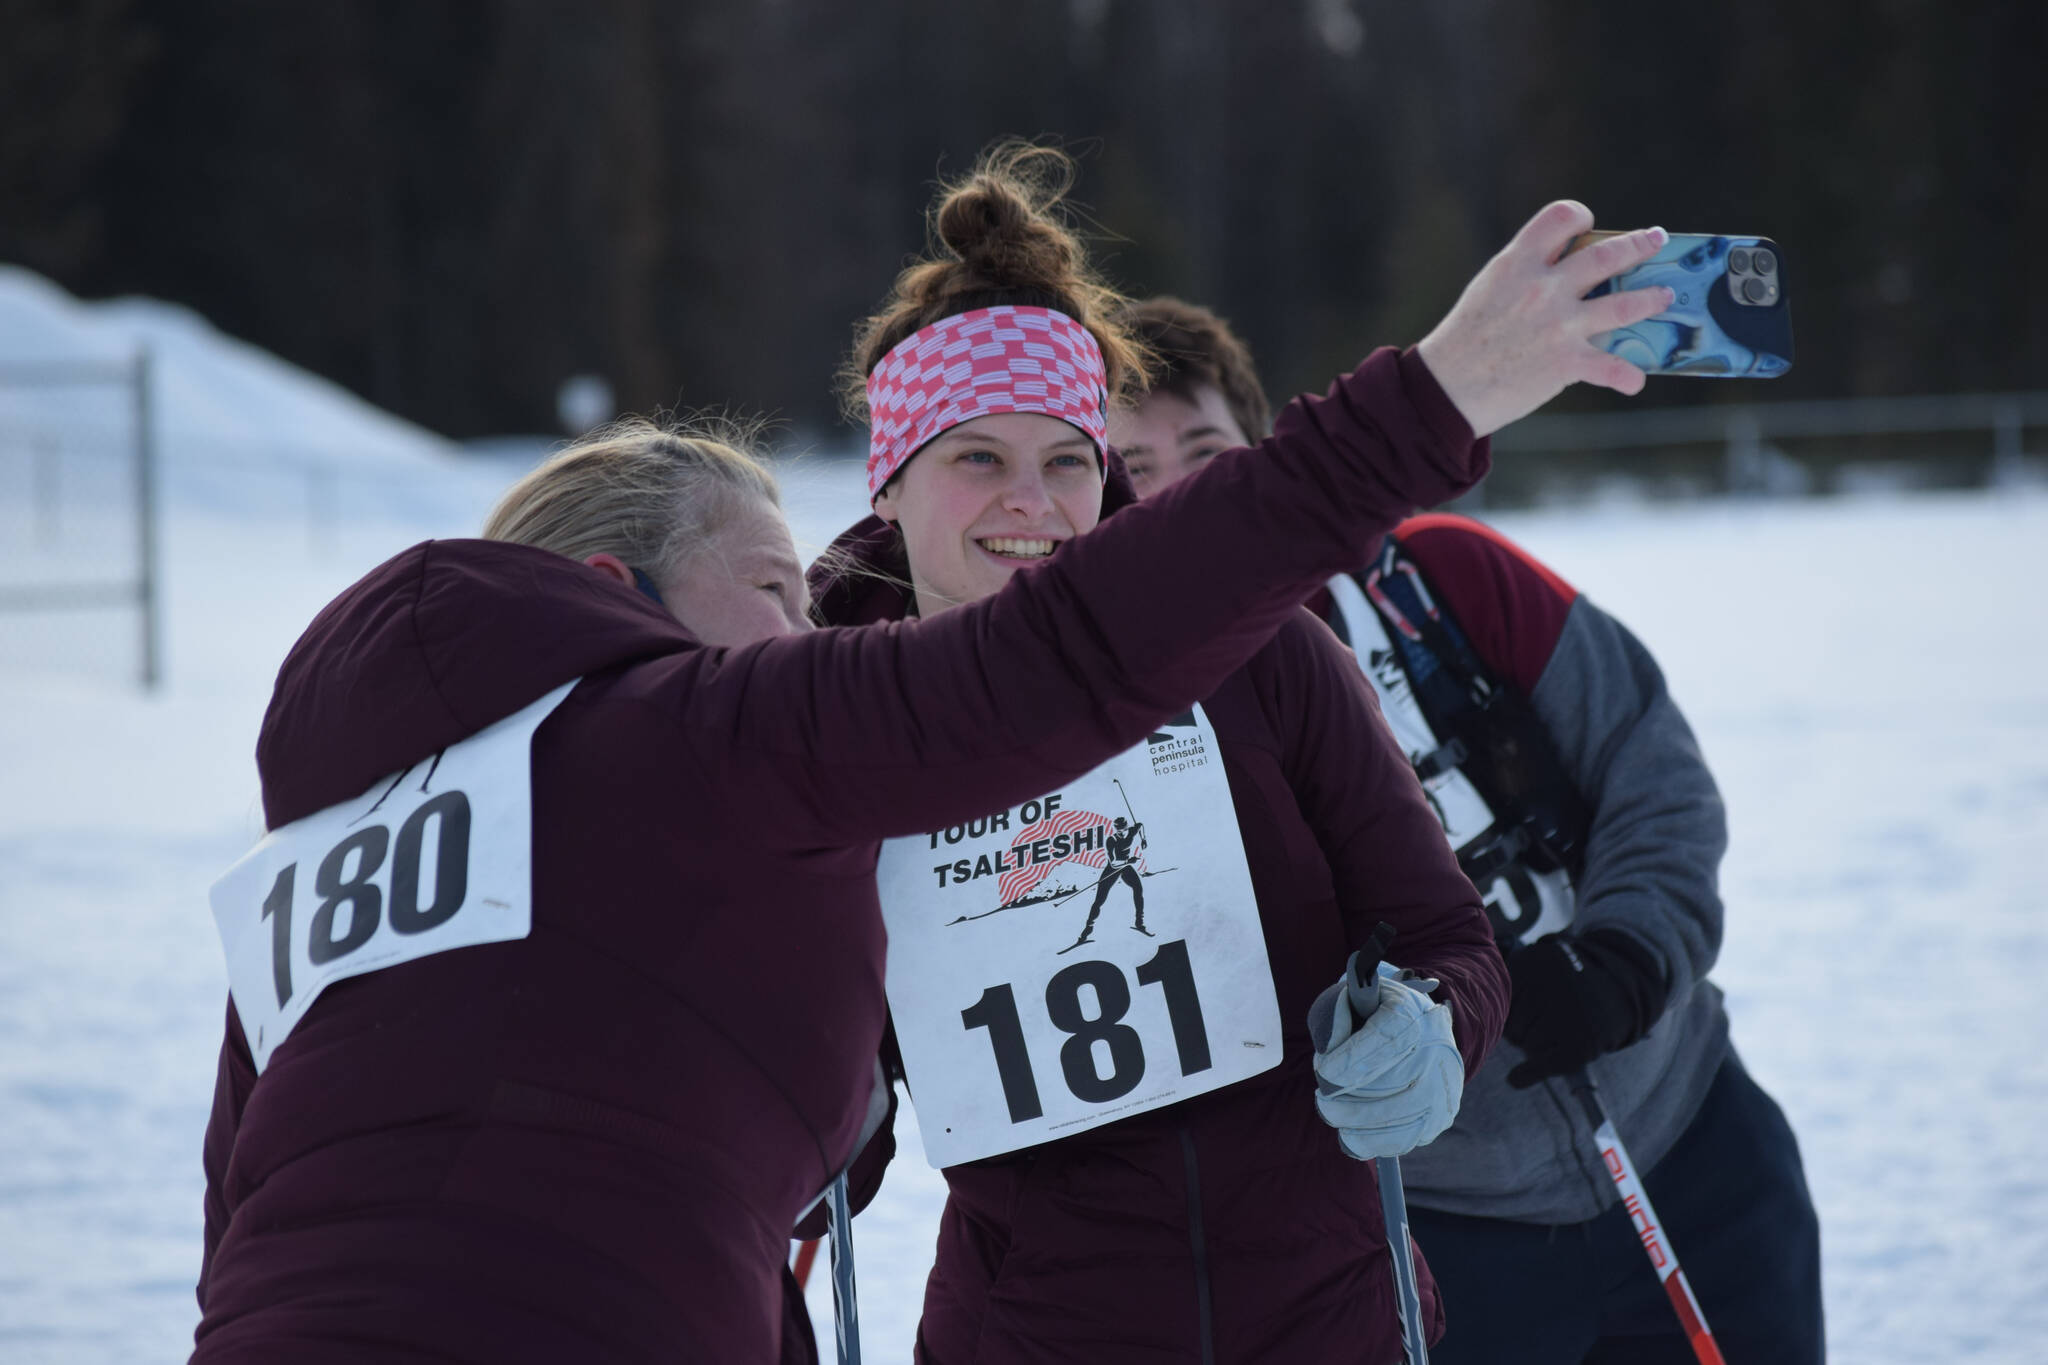 Skiers prepare for the Tour of Tsalteshi race just outside of Soldotna on Sunday, Feb. 20, 2022. (Camille Botello/Peninsula Clarion)